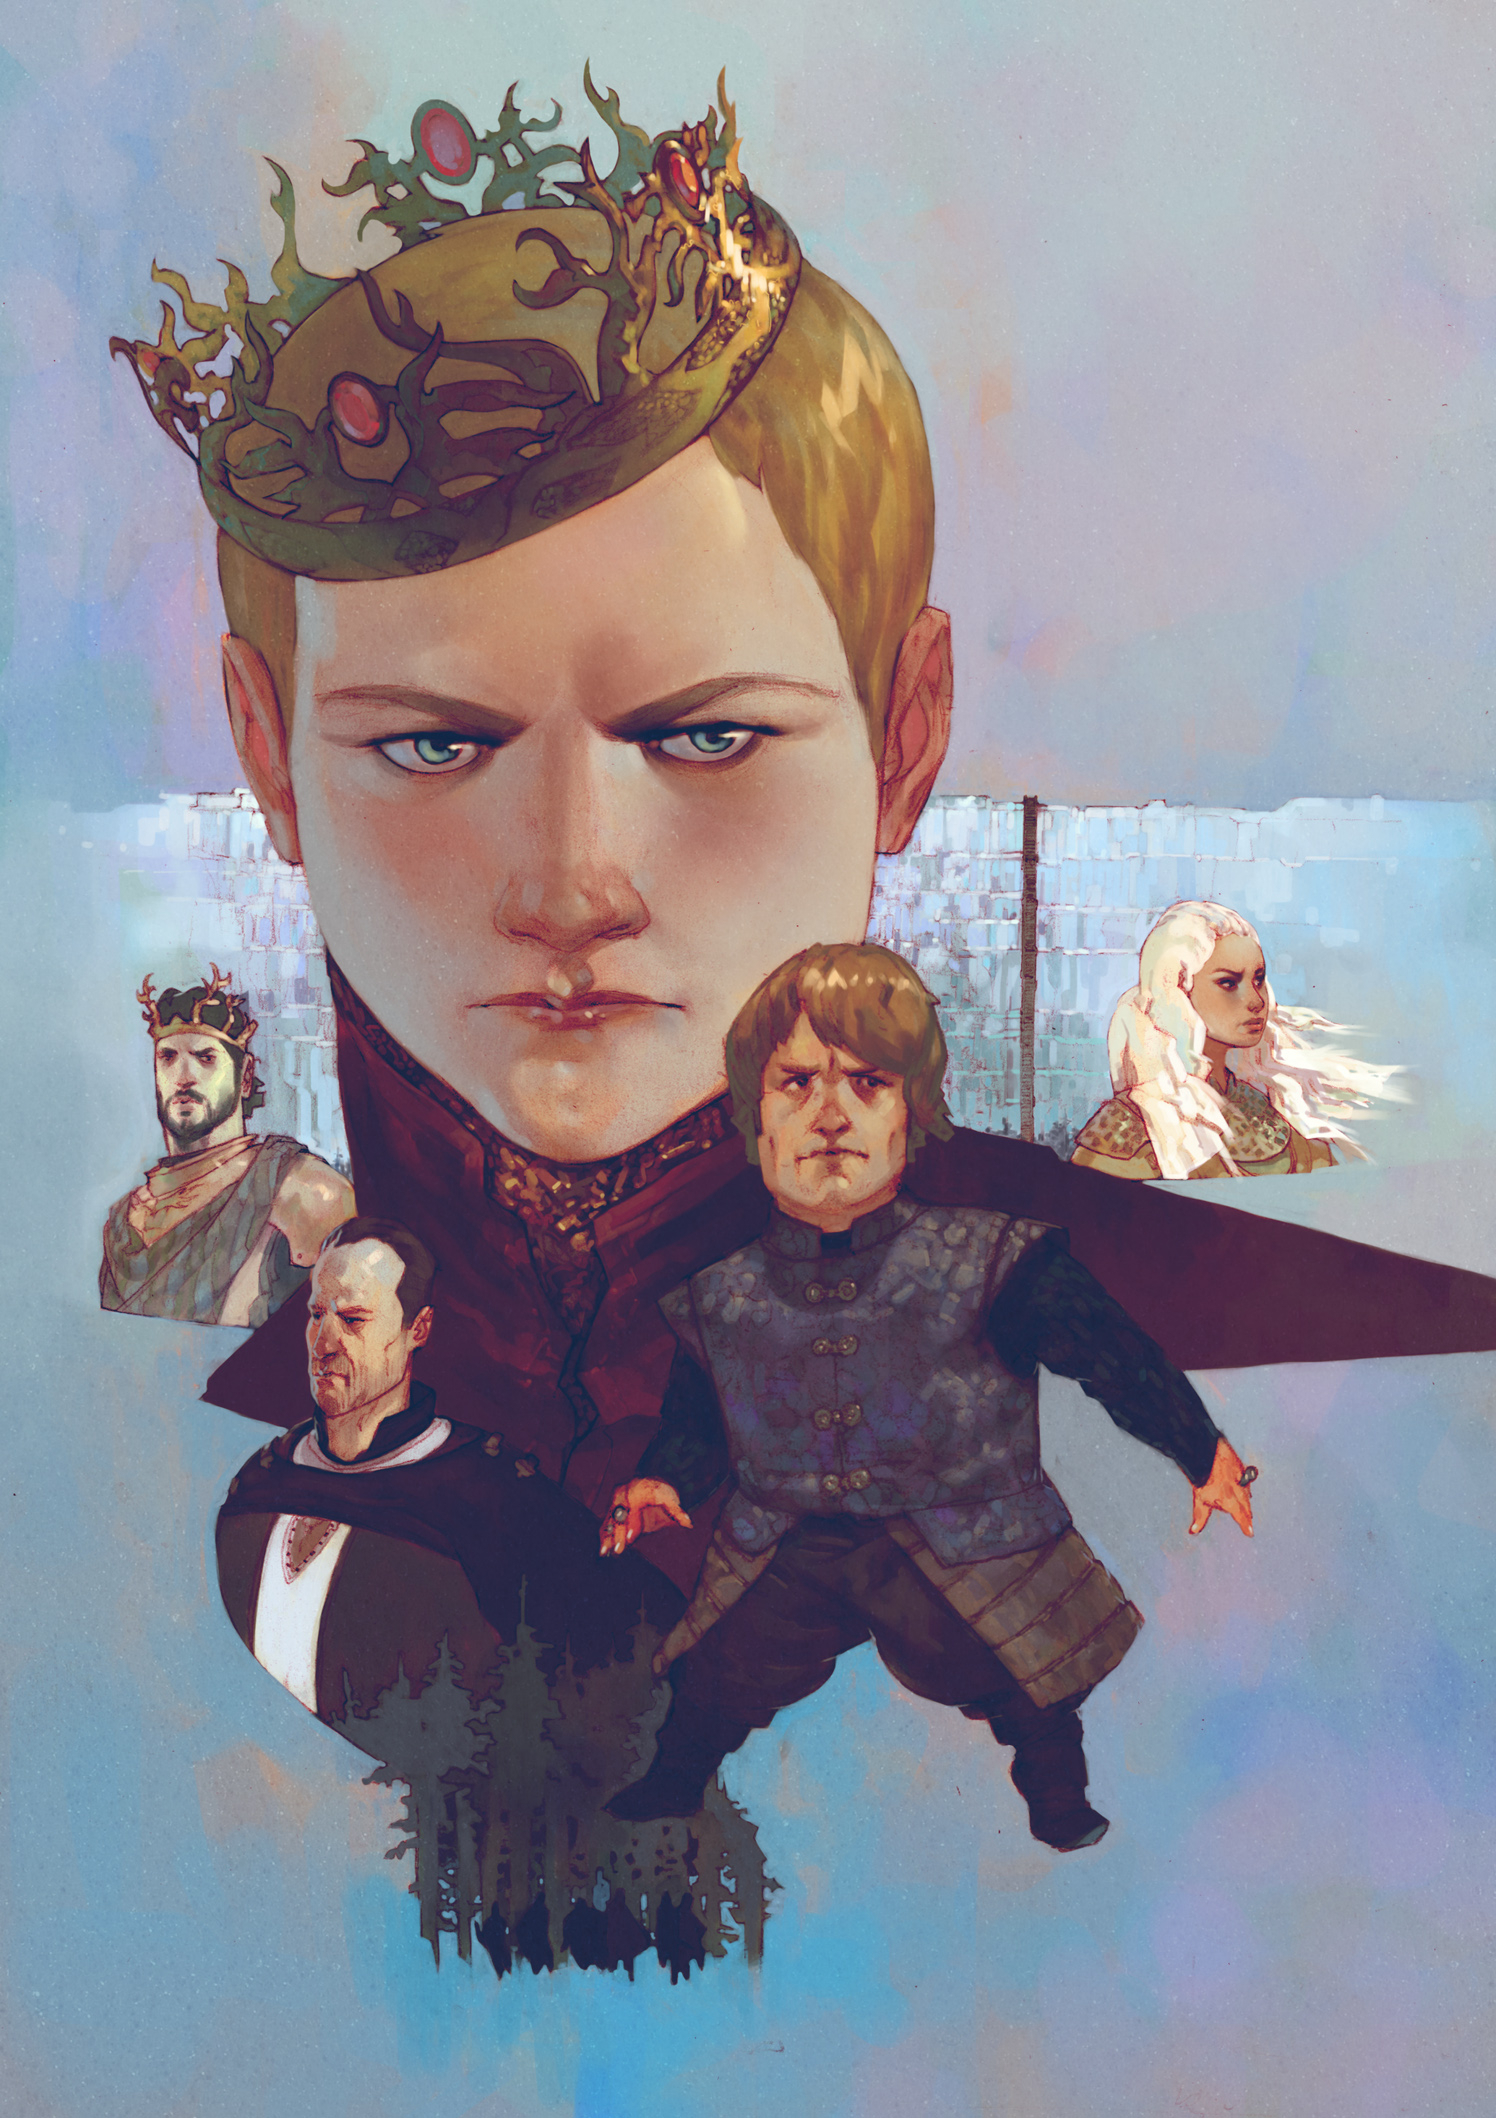 Games Of Thrones / The New Yorker